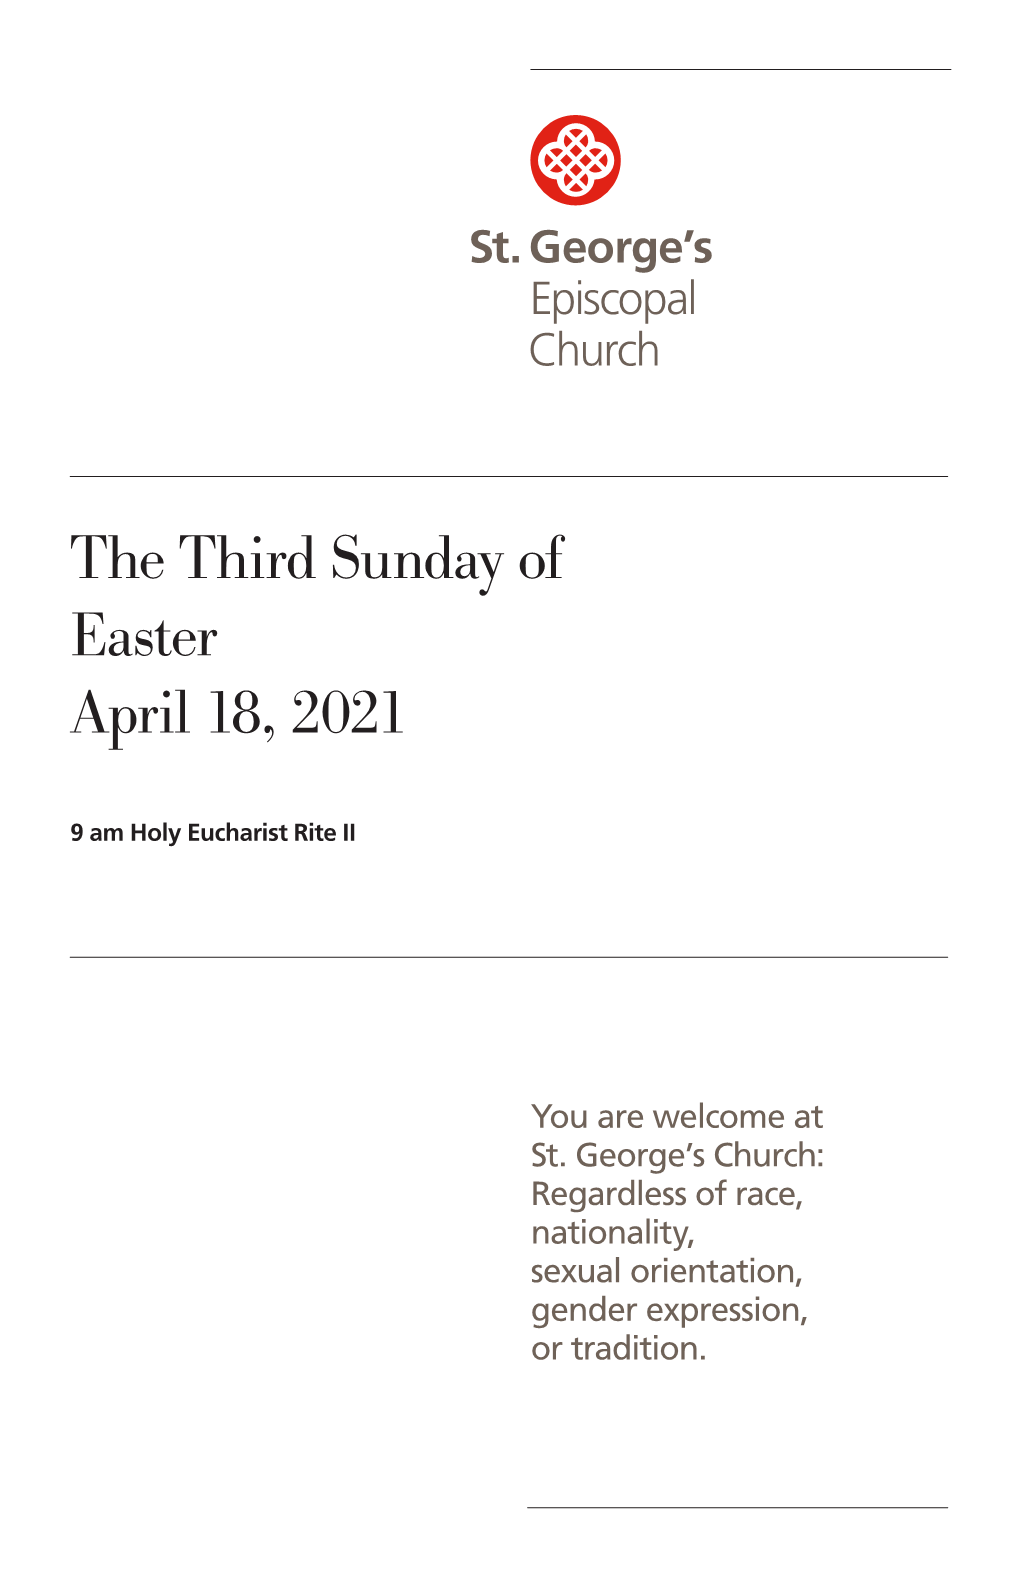 The Third Sunday of Easter April 18, 2021